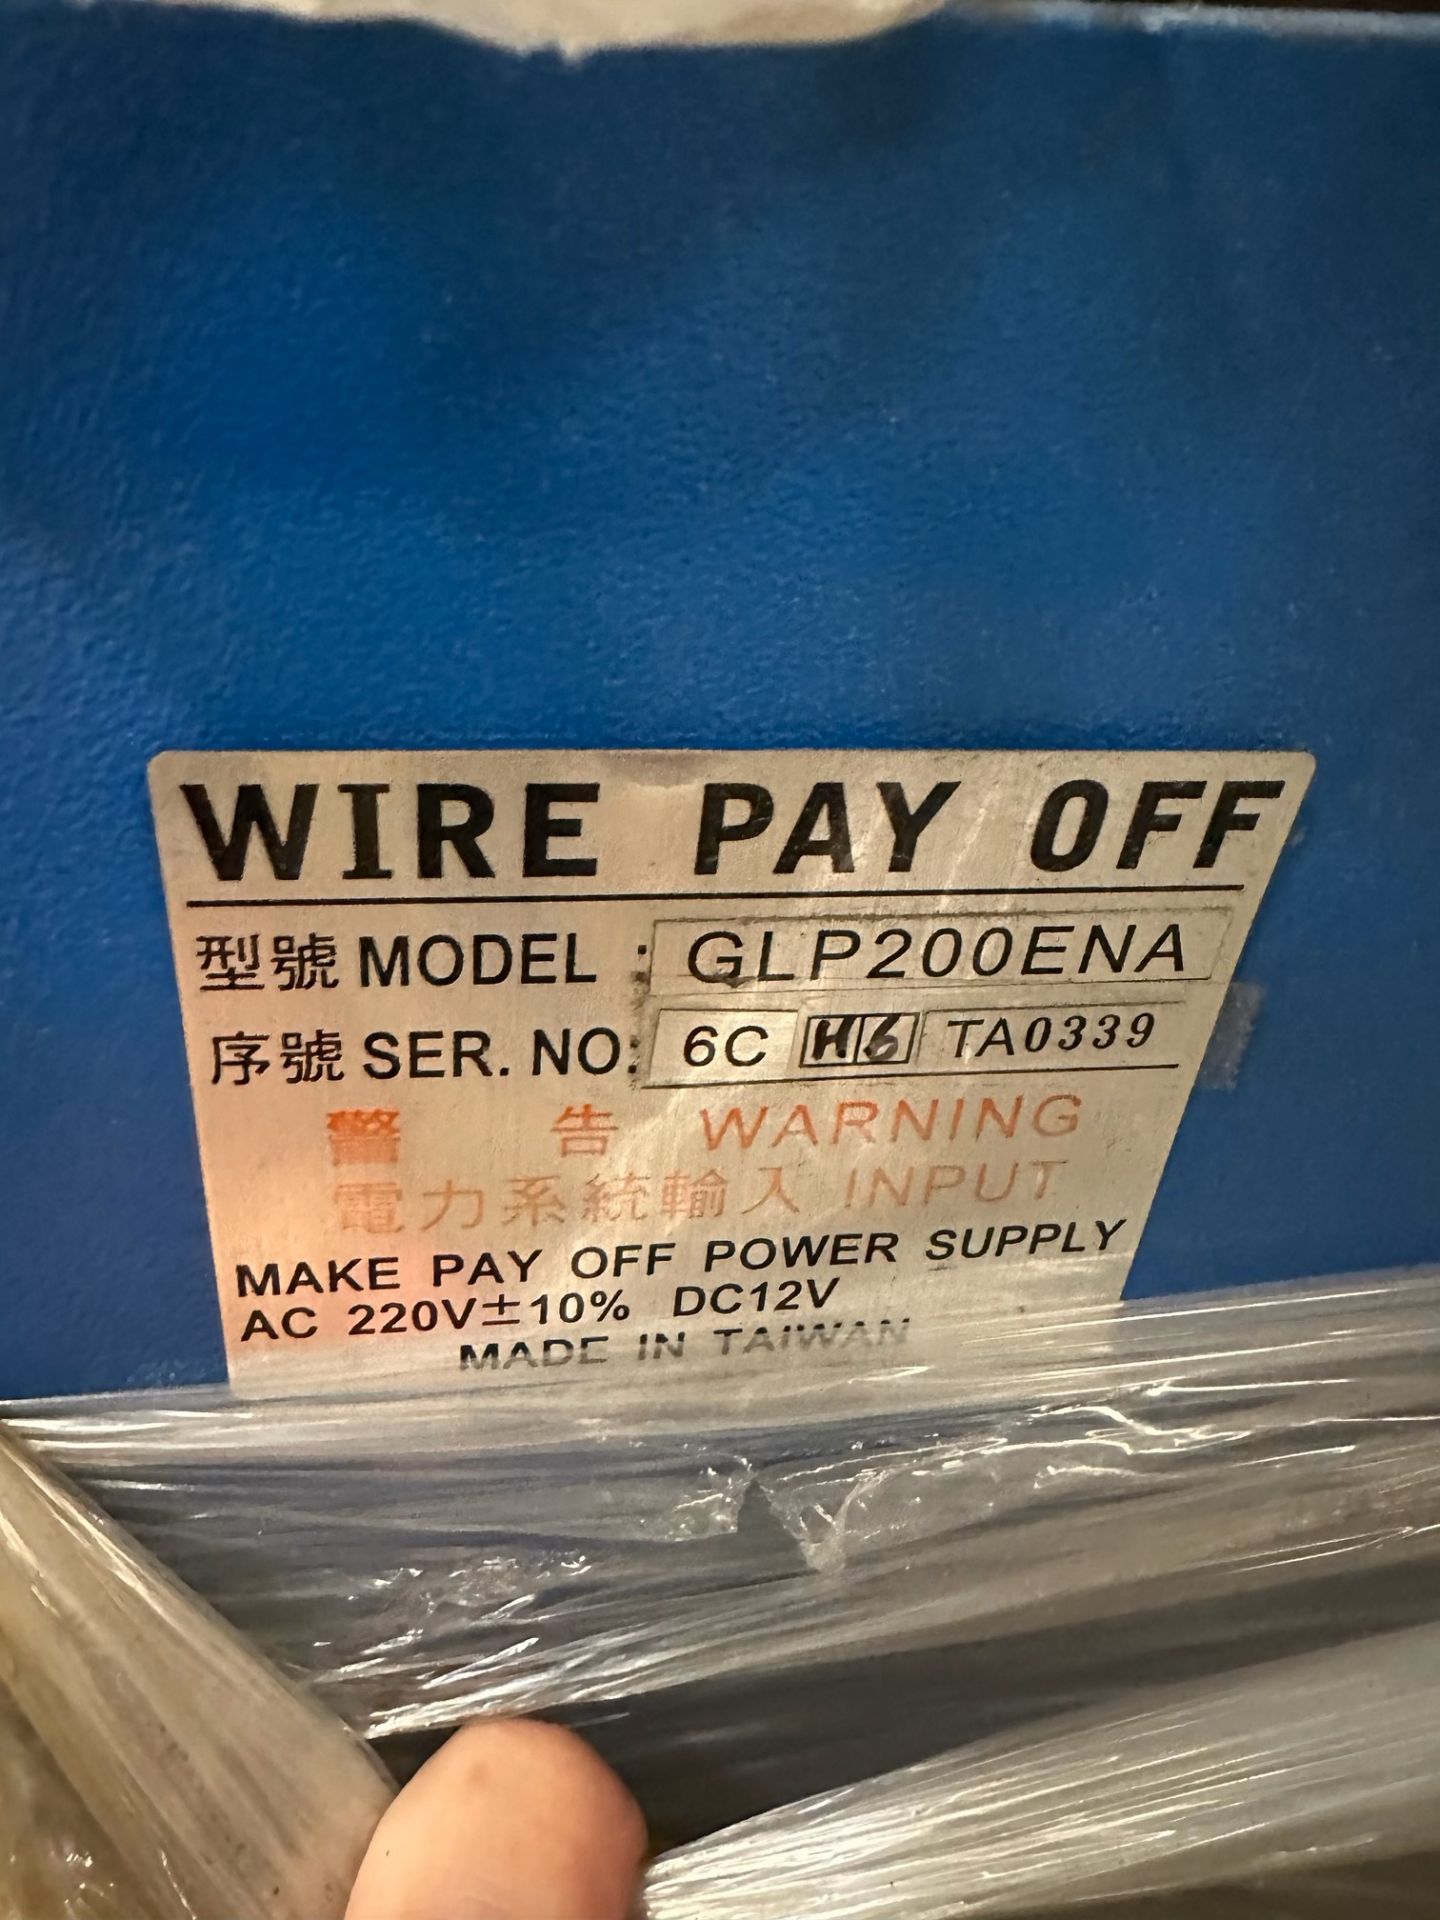 PAY OFF REEL, MDL. GLP 200 ENA, S/N TA0039 (Located at: RES Machinery Moving Storage Facility, 701 - Image 2 of 2